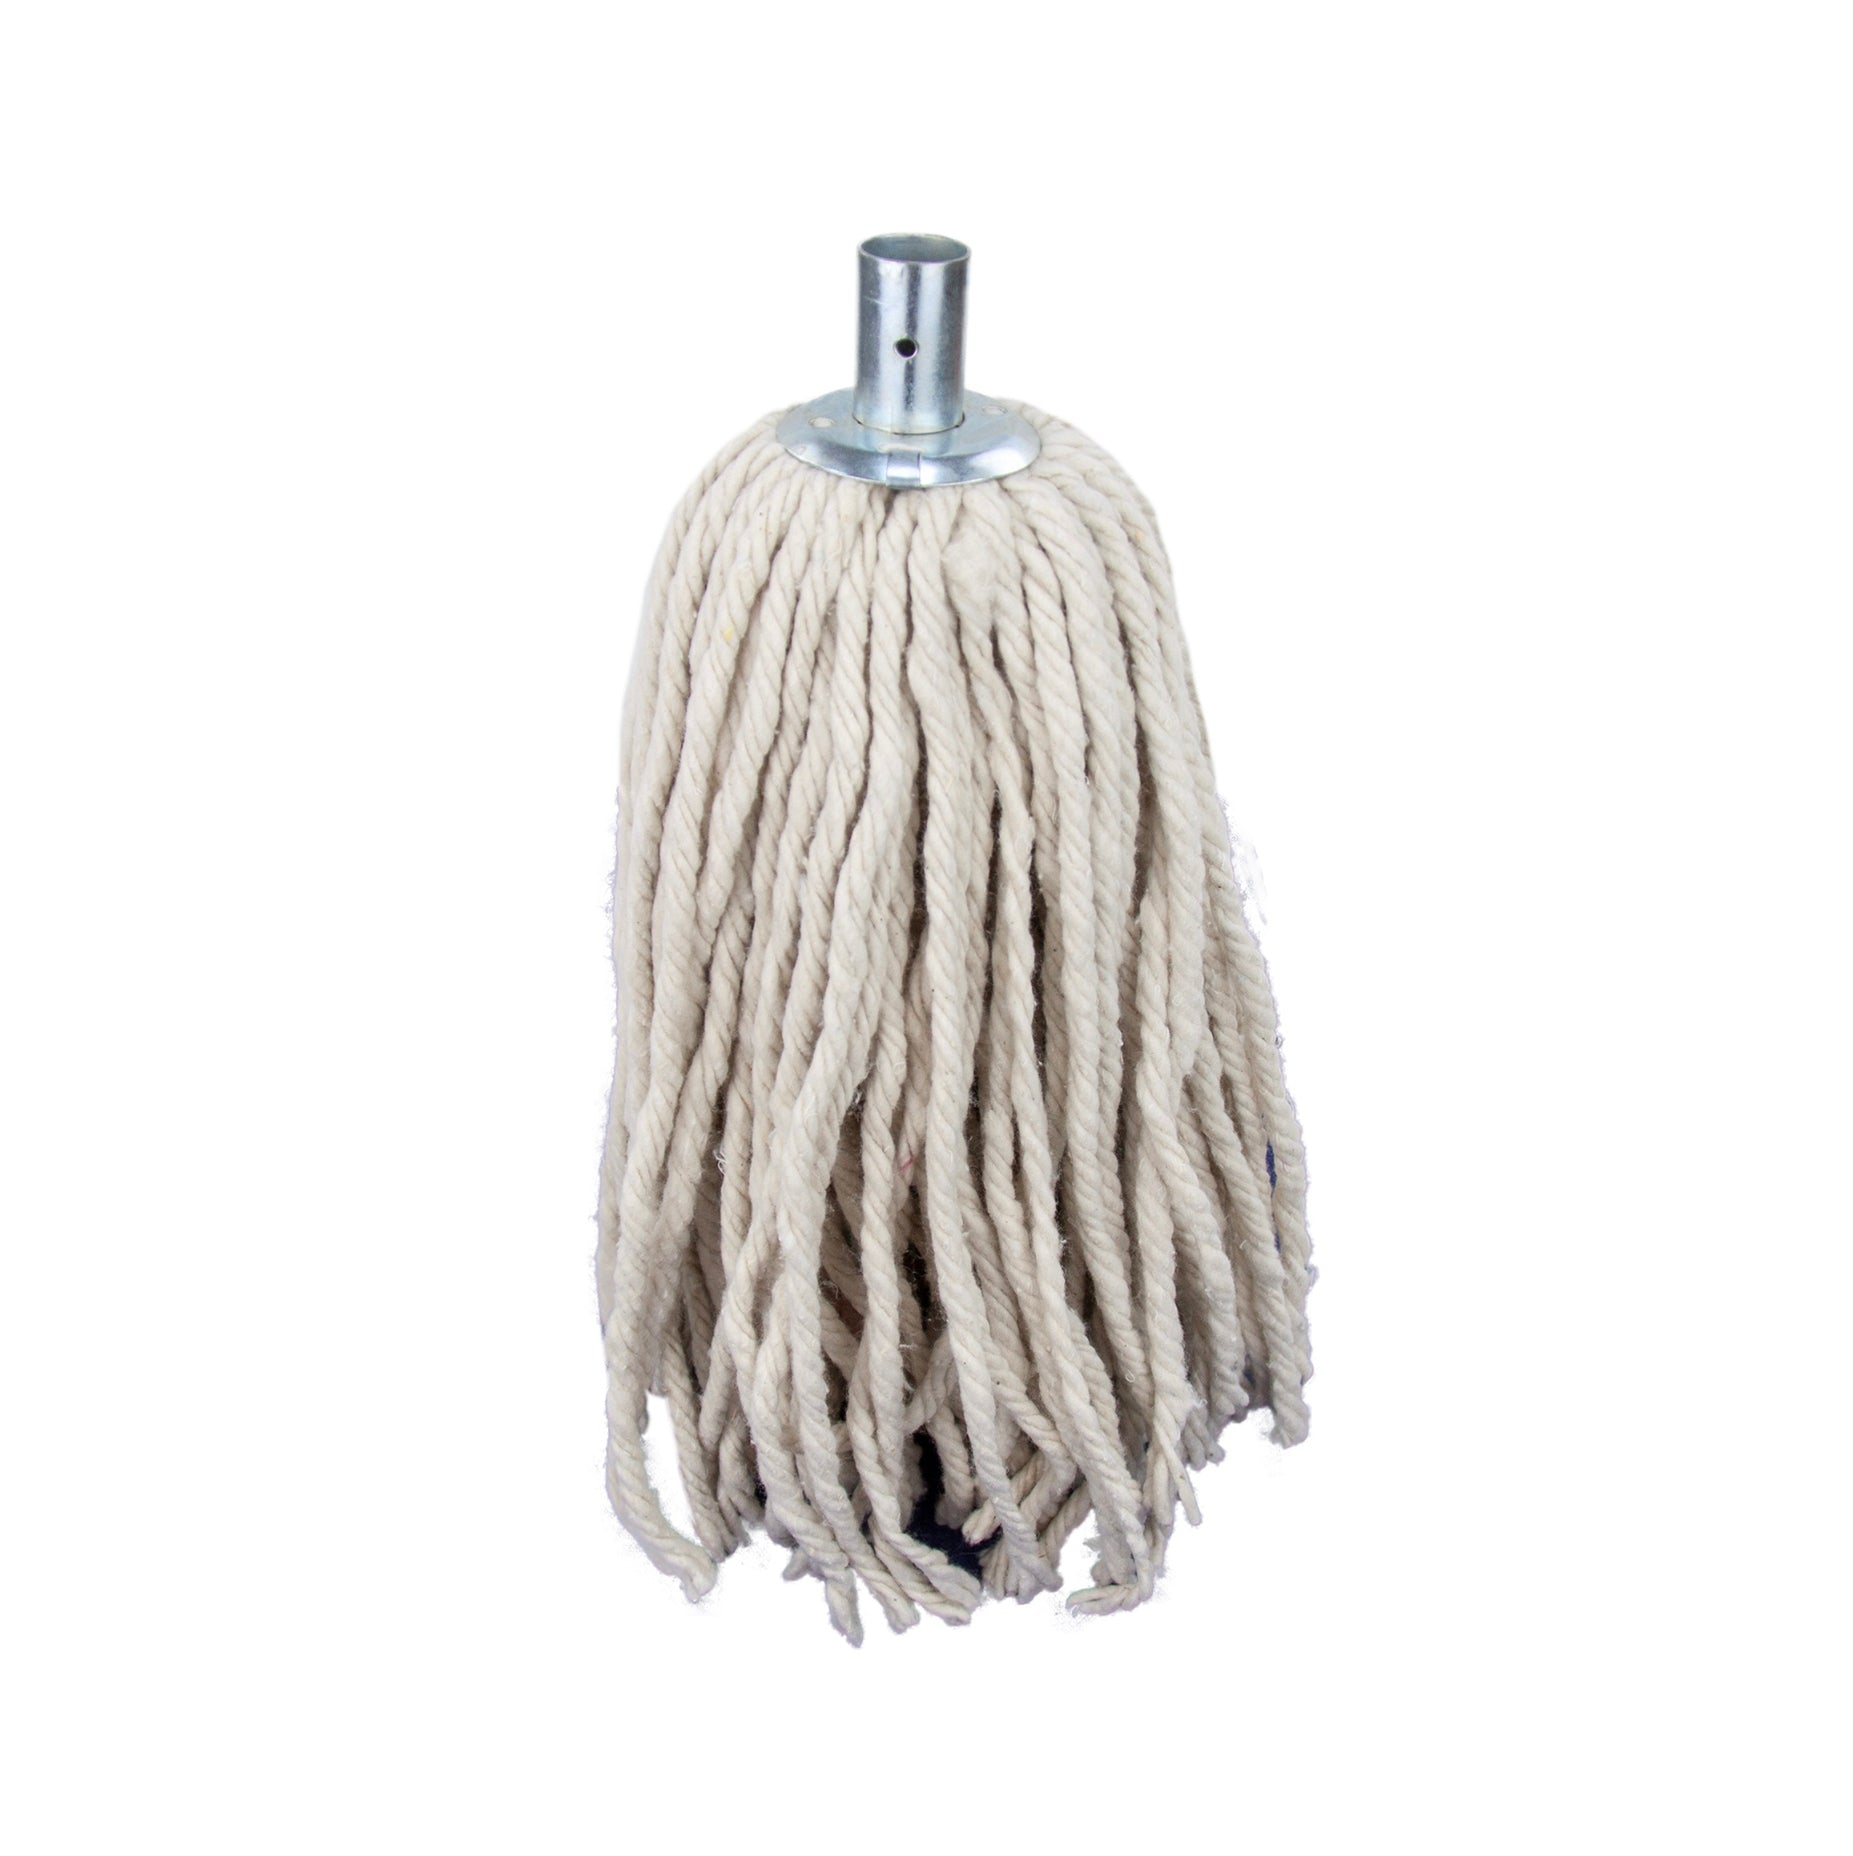 Cotton Mop Head With Metal Socket